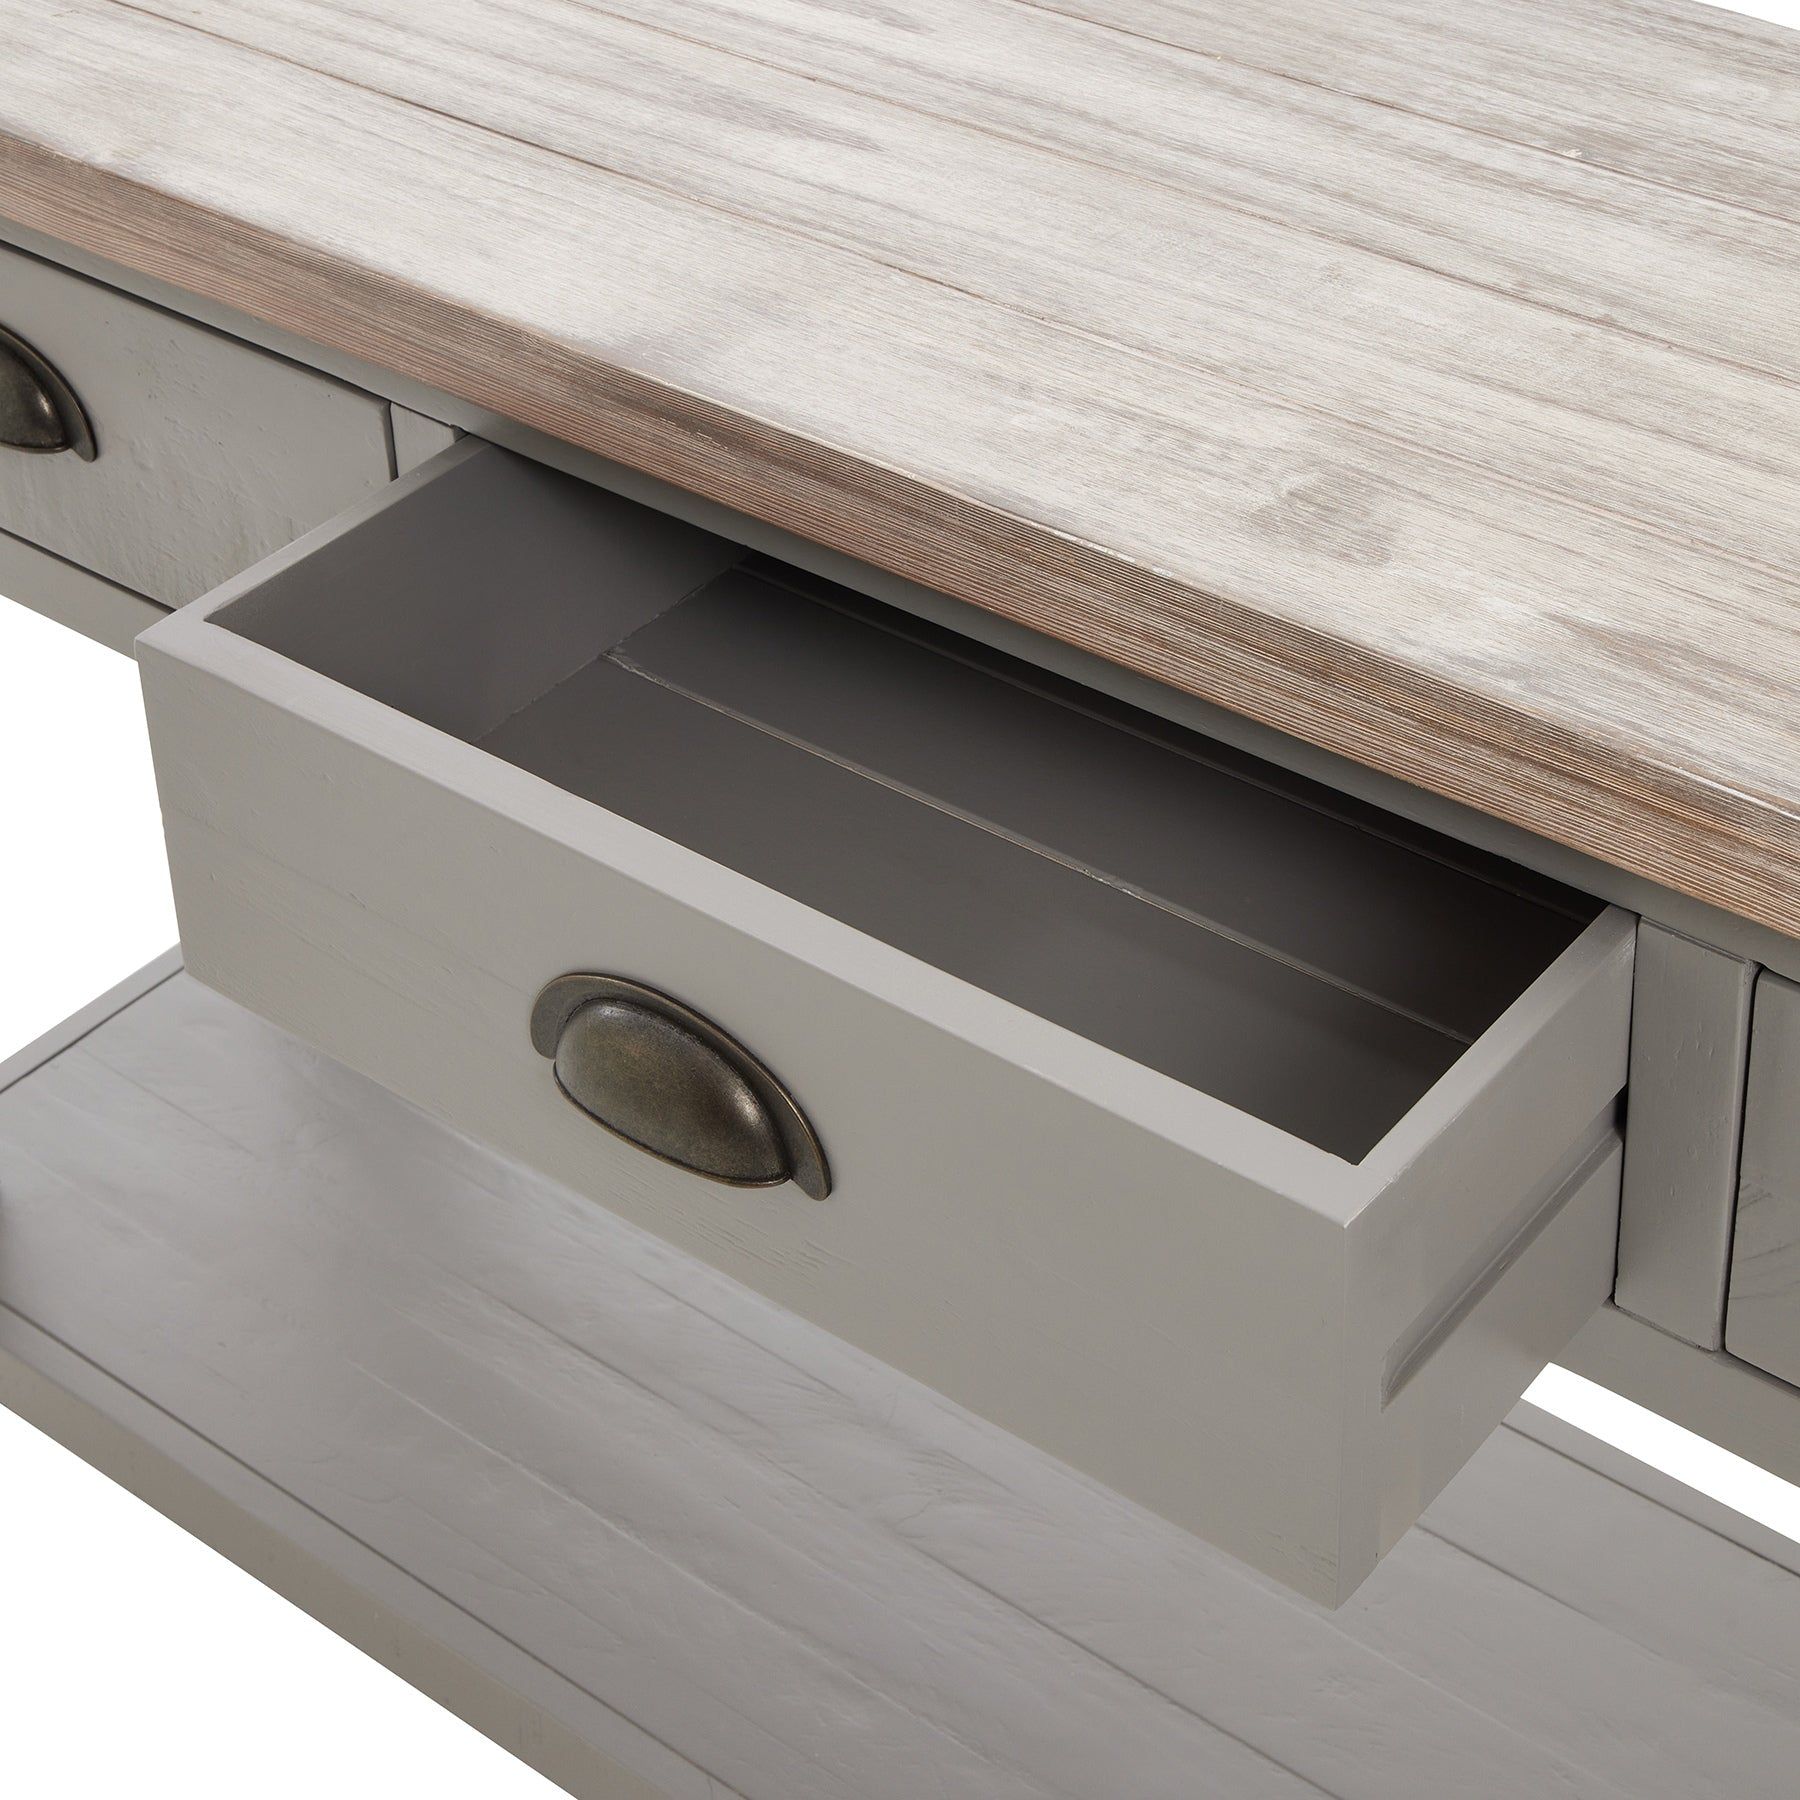 The Oxley Collection Three Drawer Console Table - Ashton and Finch